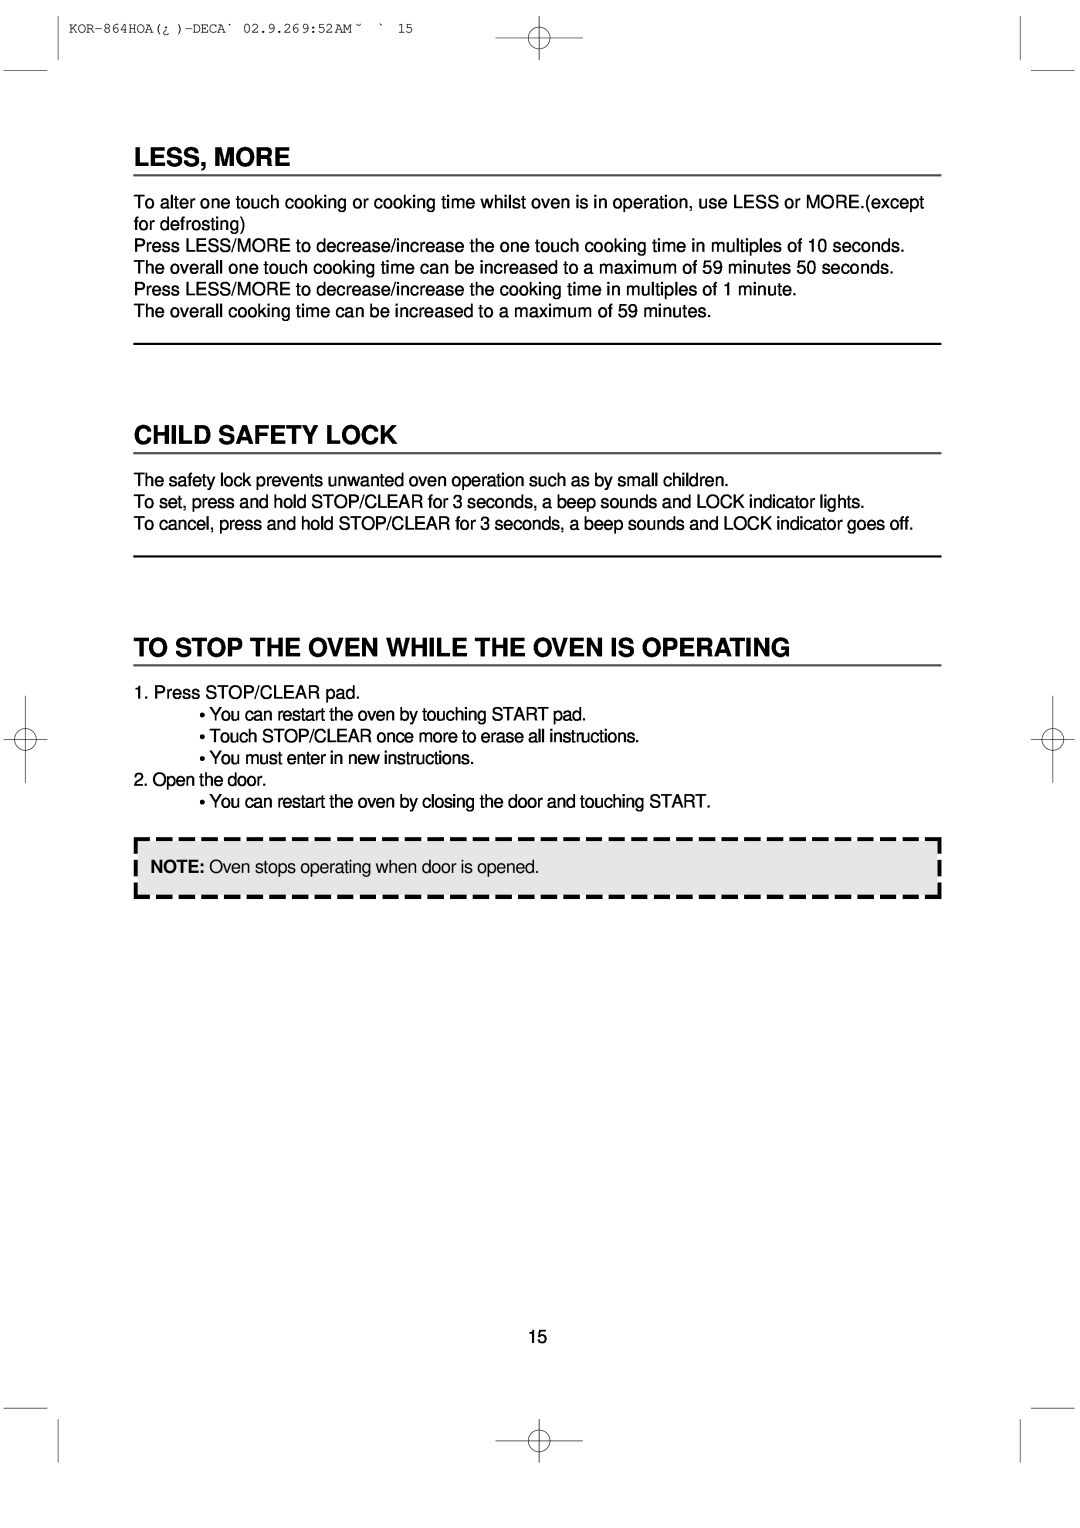 Daewoo KOR-864H operating instructions Less, More, Child Safety Lock, To Stop The Oven While The Oven Is Operating 